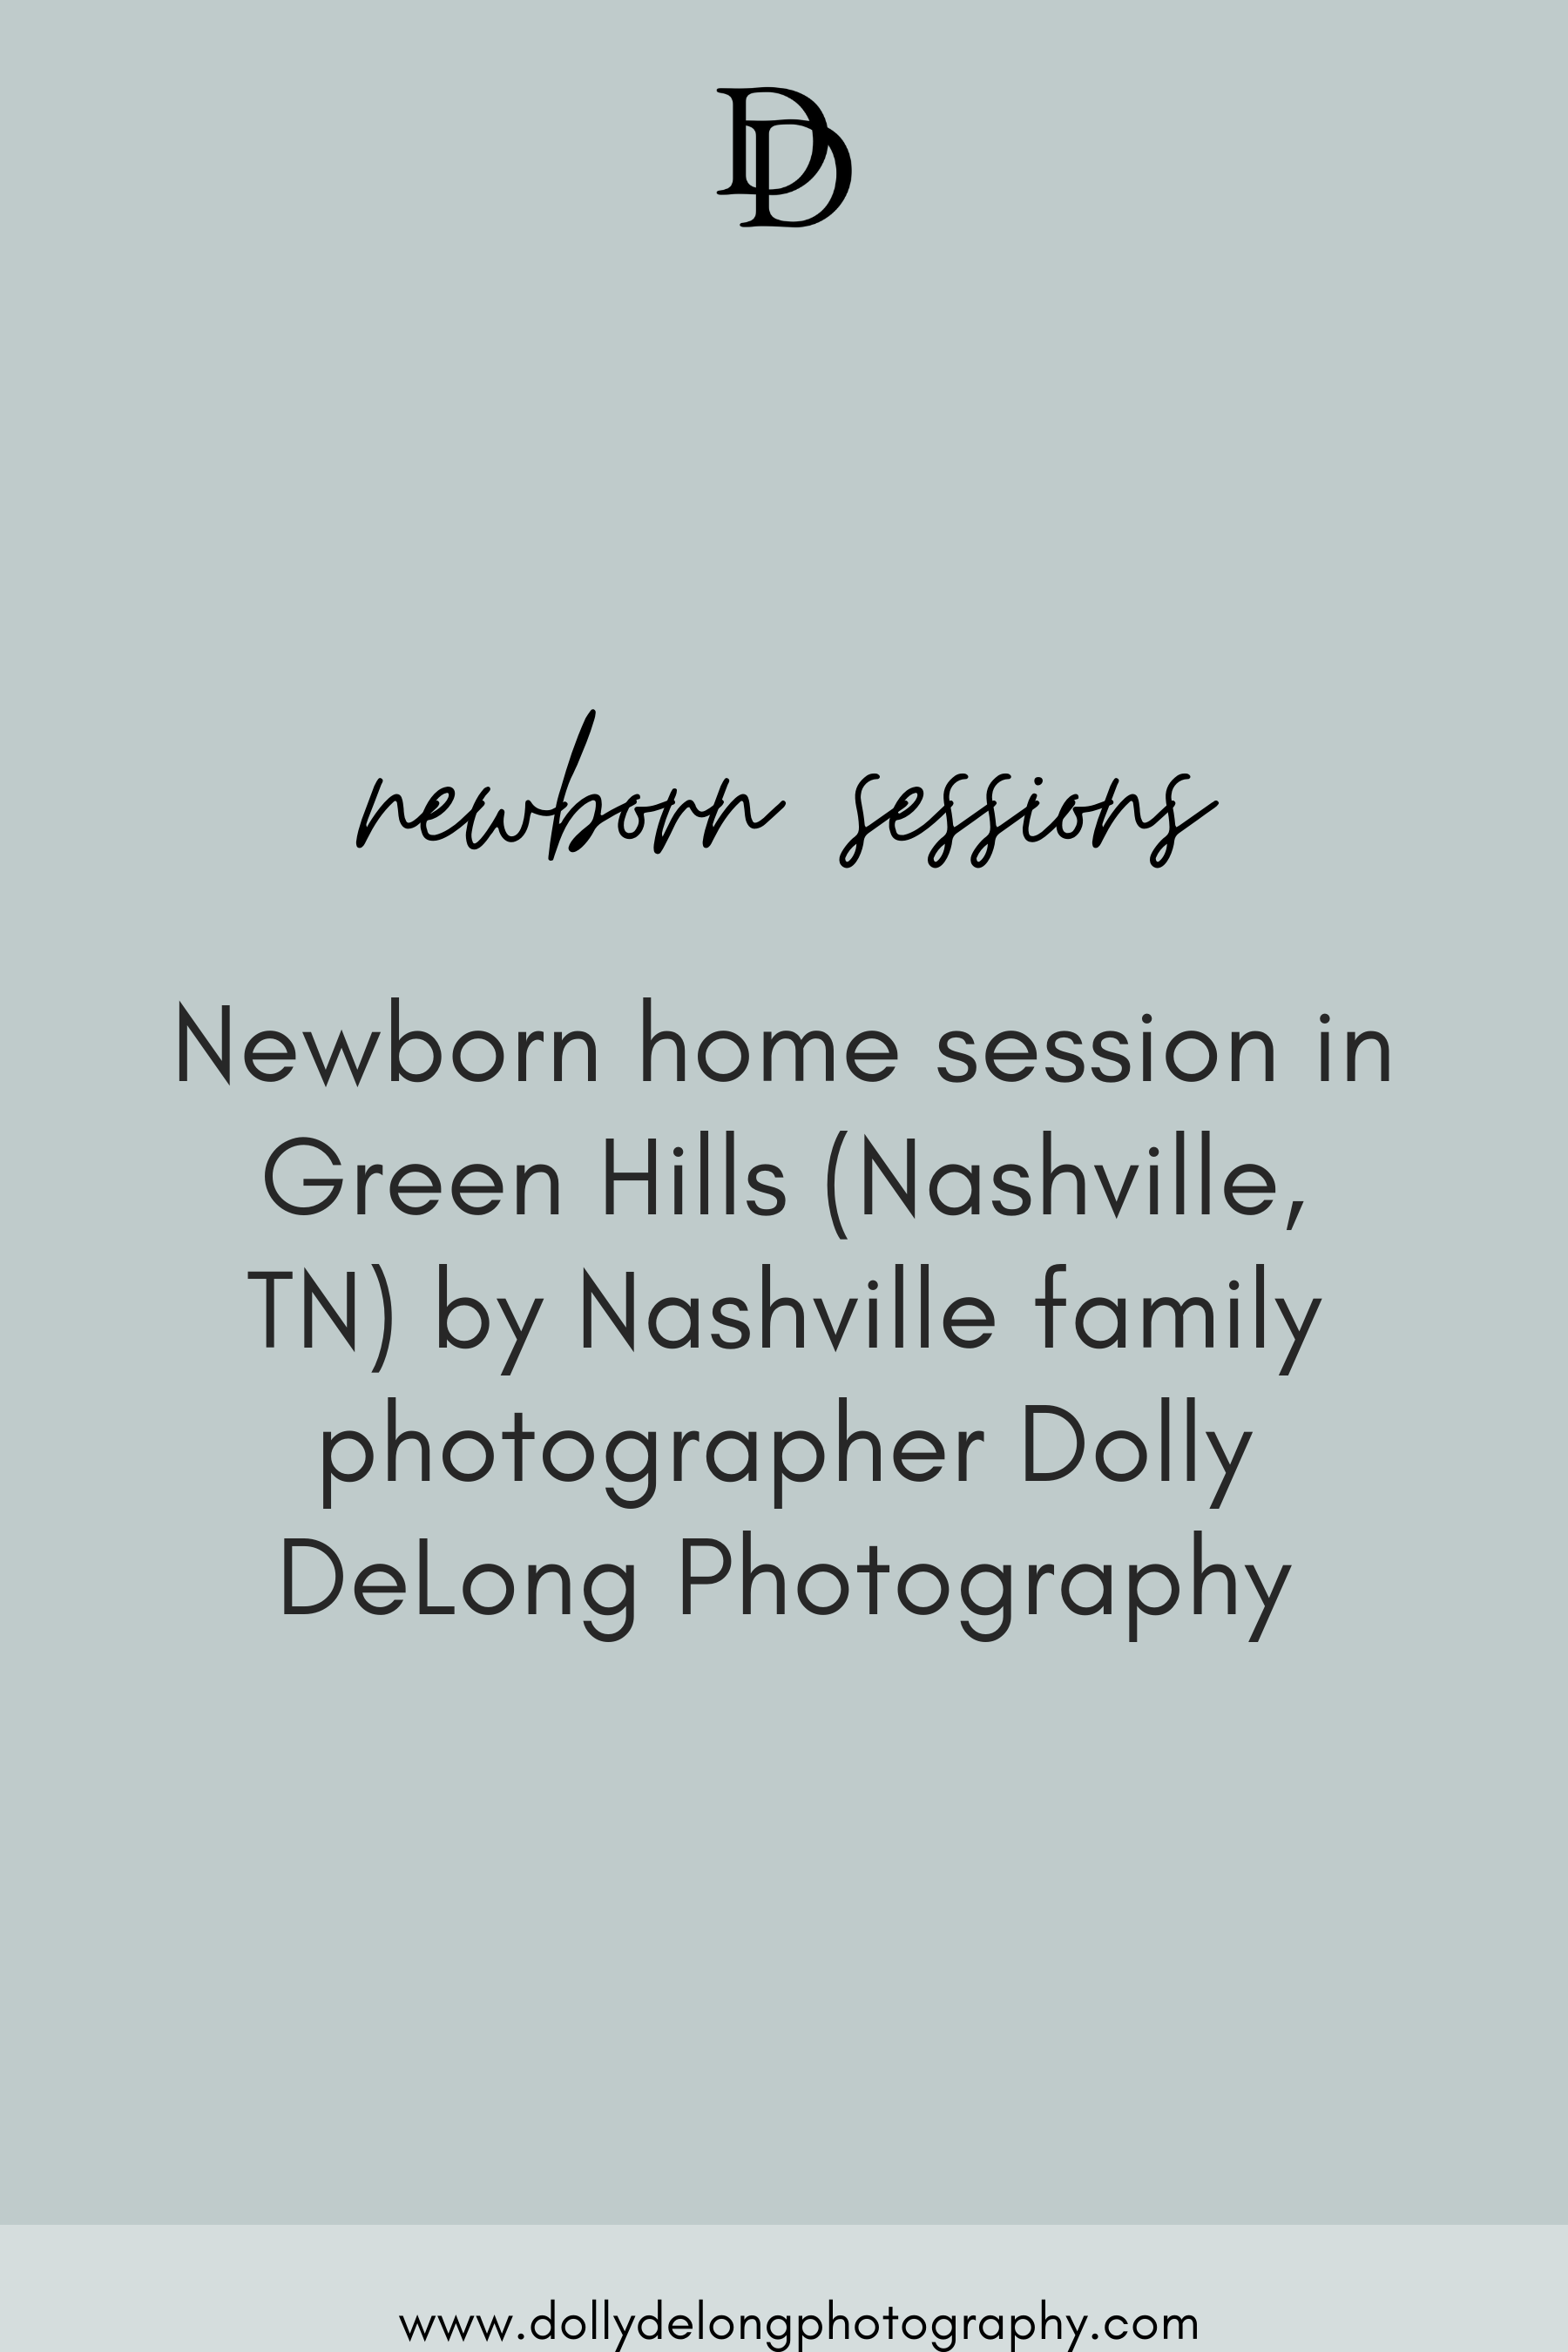 Newborn Home Session in Green Hills Nashville Tennessee by Nashville Family Photographer Dolly DeLong Photography